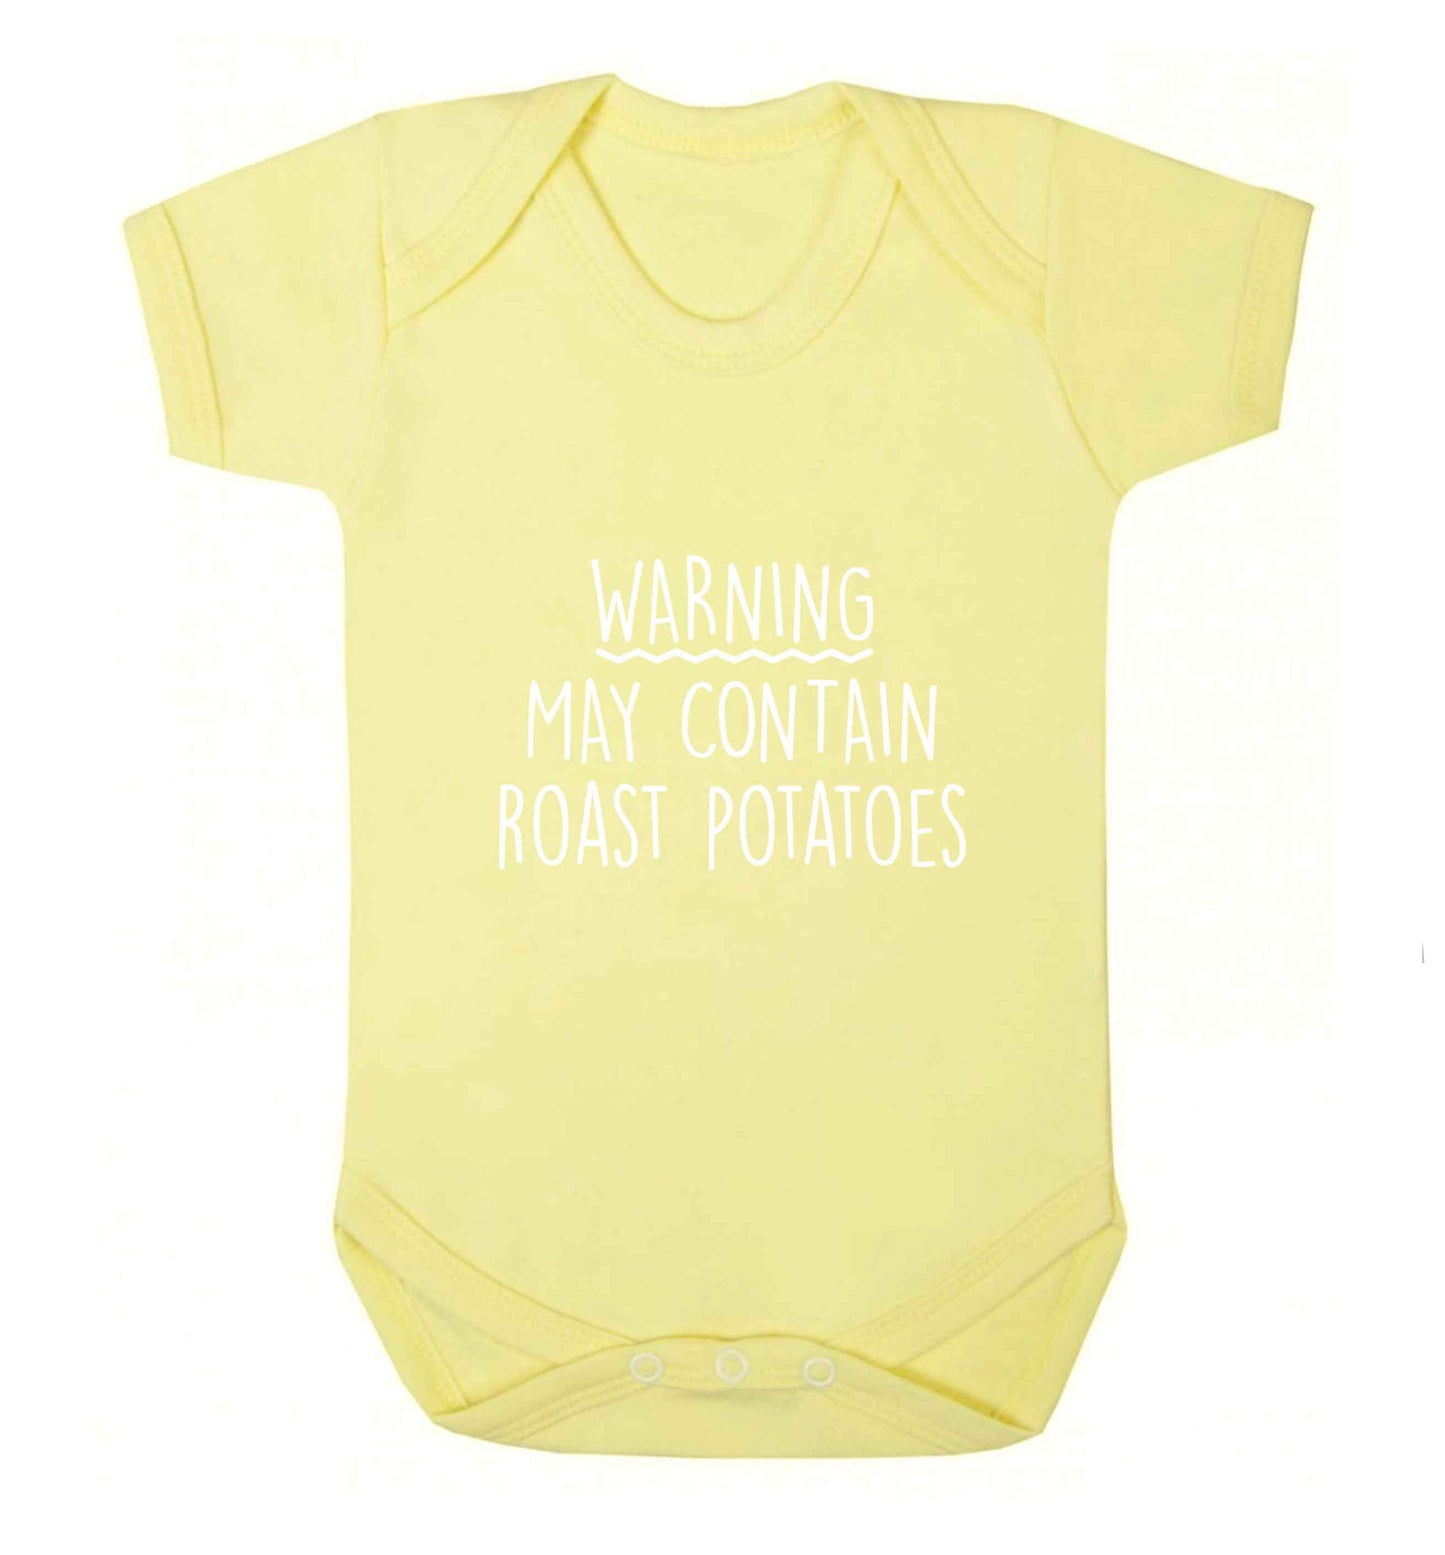 Warning may containg roast potatoes baby vest pale yellow 18-24 months